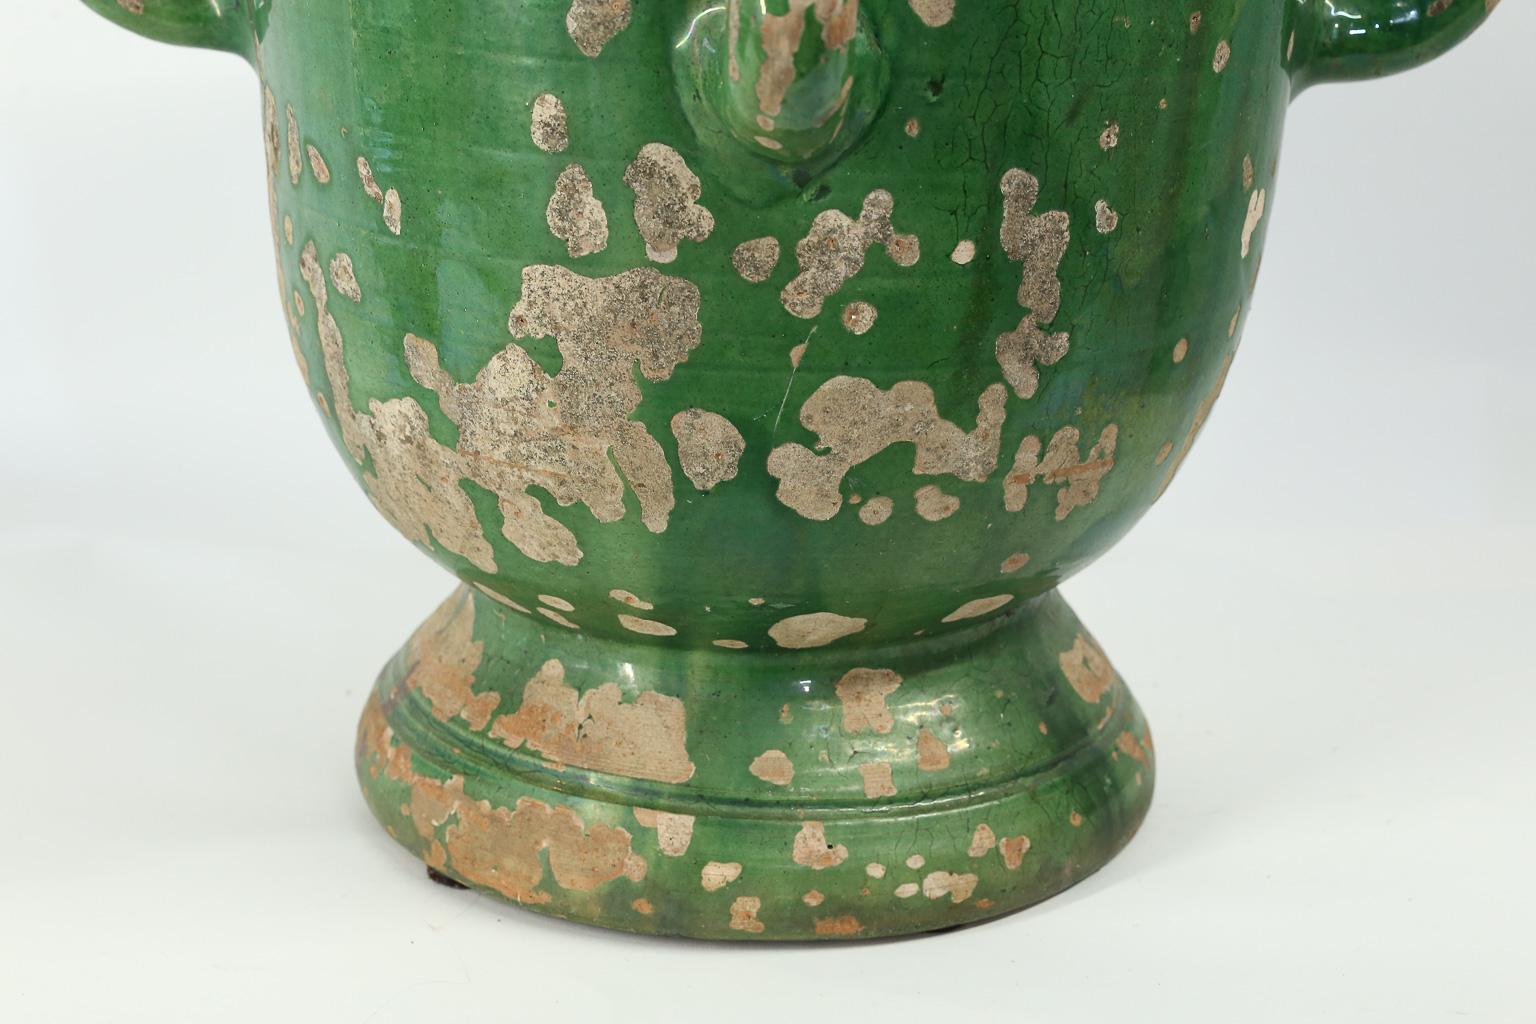 This is a lovely green glazed planter from Anduze, France with four handles and a footed base. The beautiful green glaze has worn in some places leaving a beautiful patina. Please note that the total diameter including the handles is 21 inches while